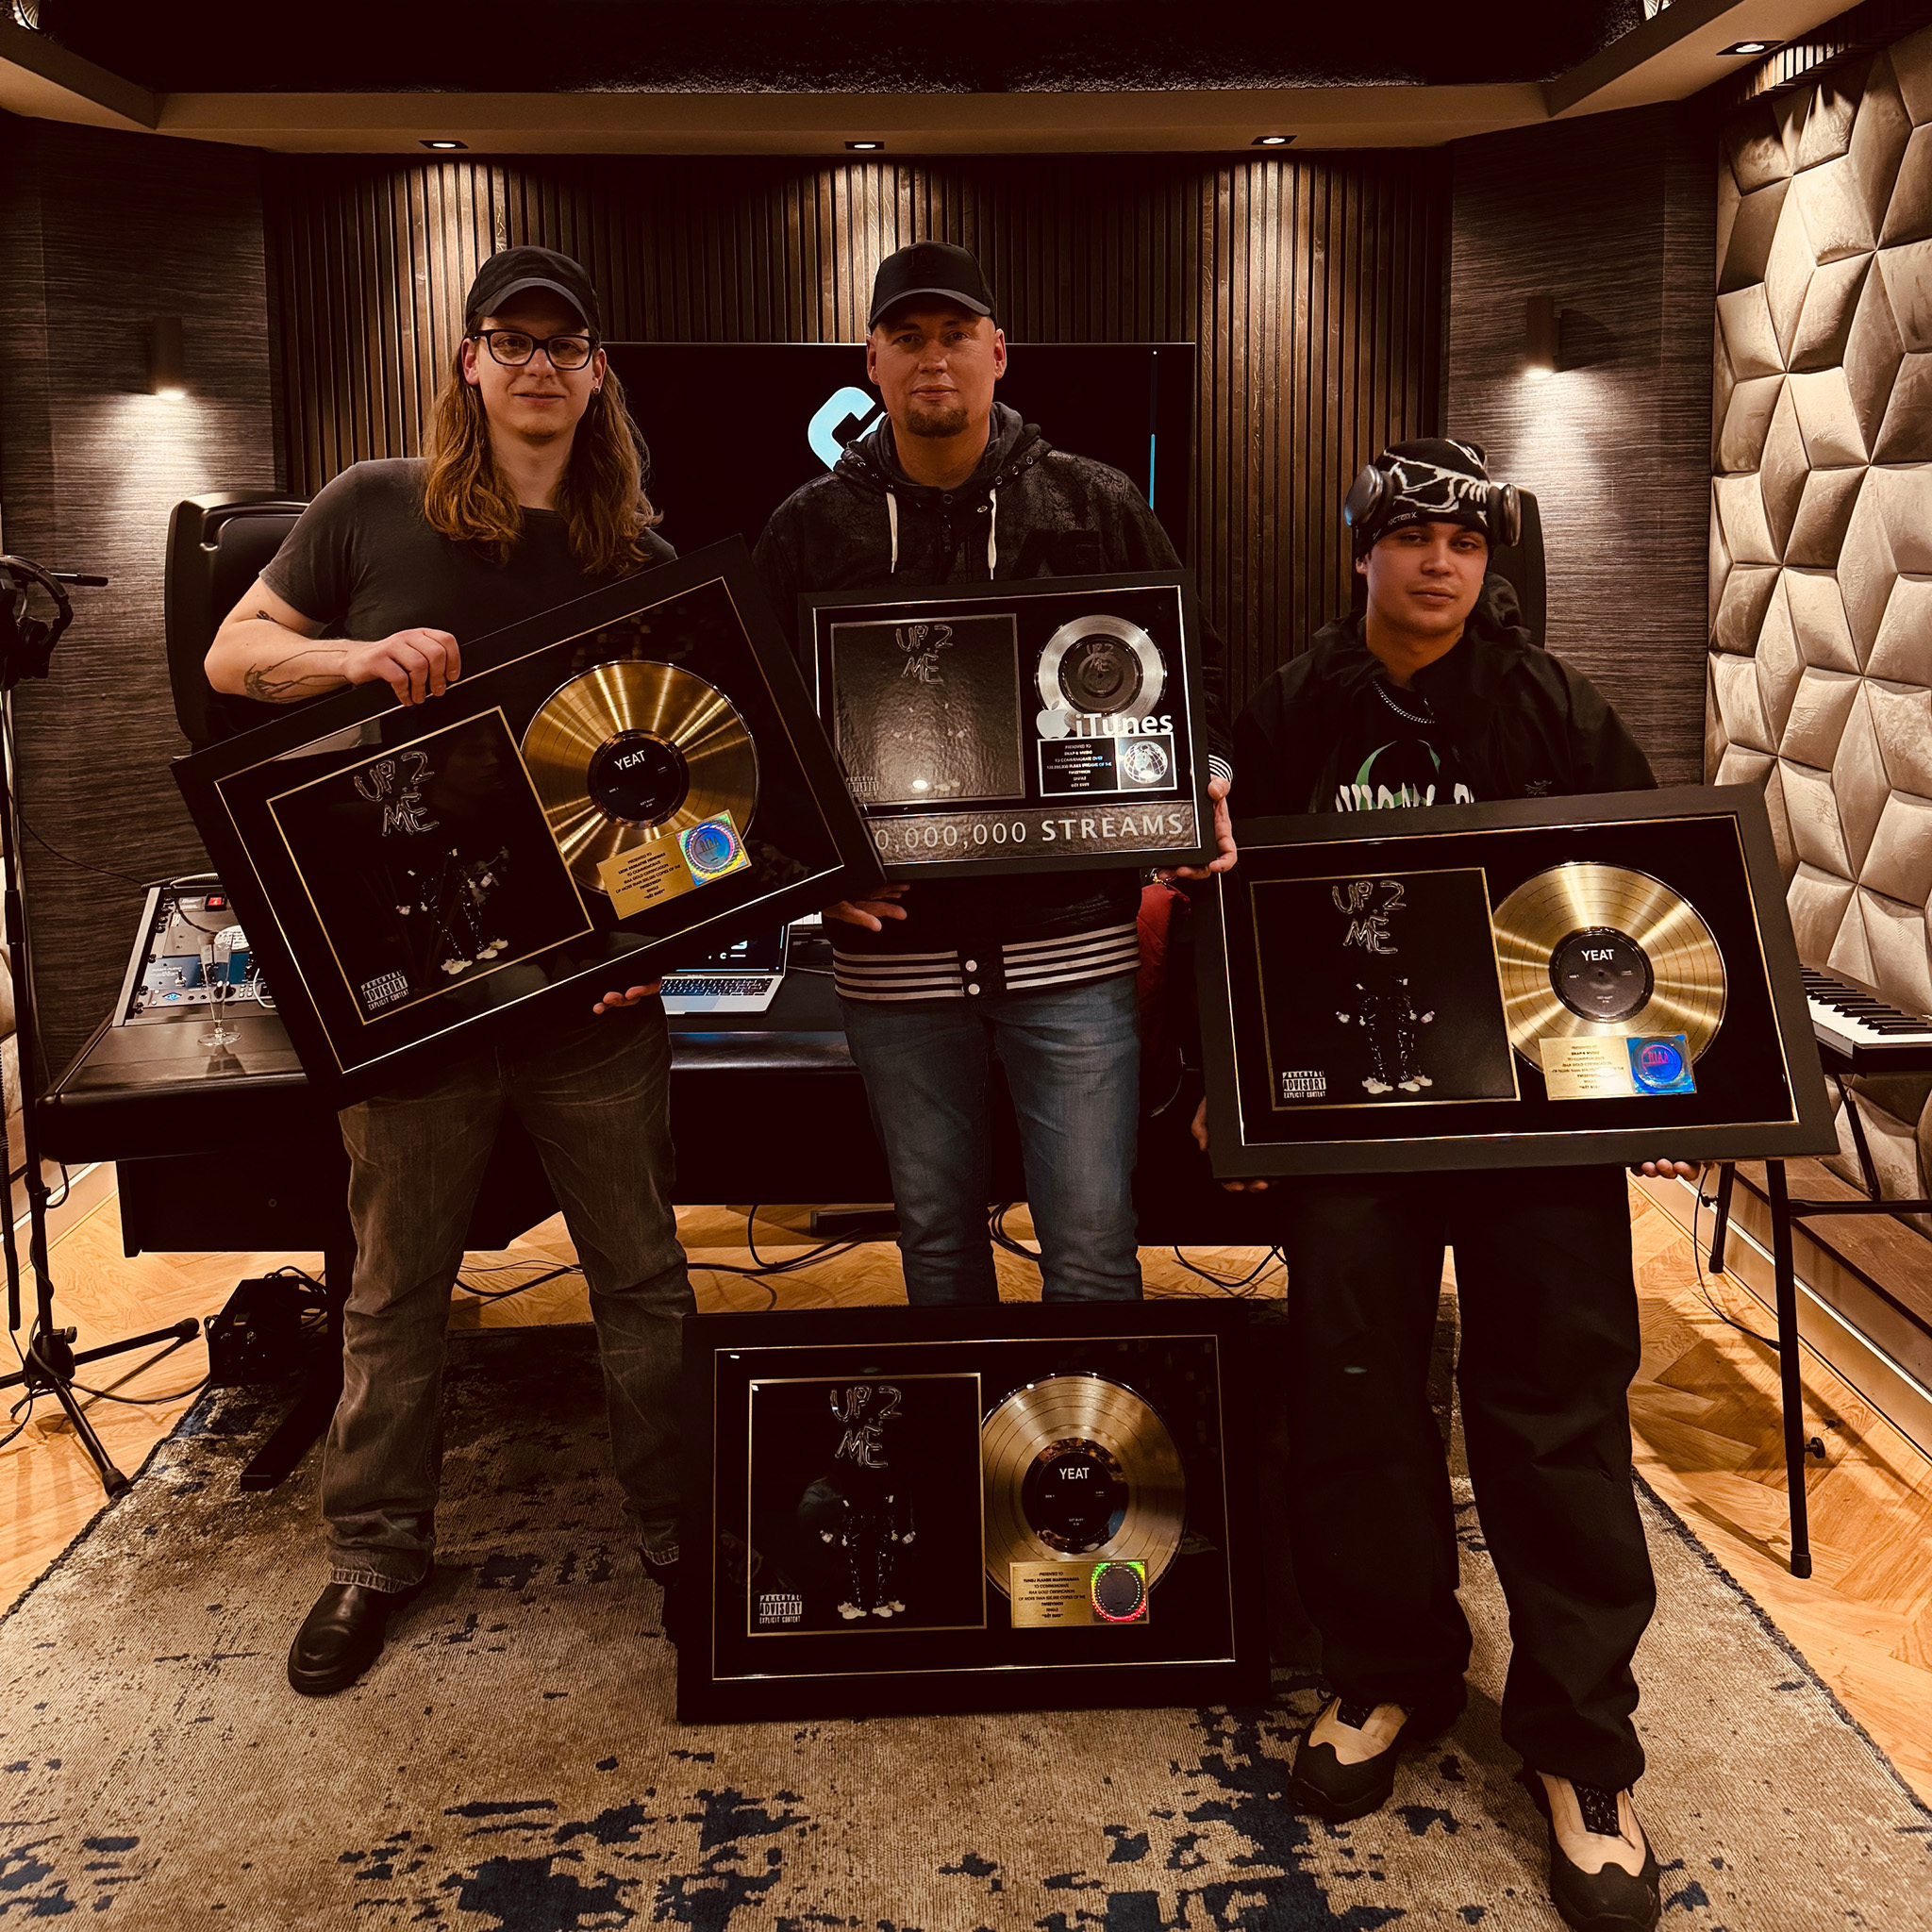 Yeat’s single Gët Busy, a production by Skimayne and Flansie, reached gold status in the United States. Over 100 million streams and still counting!